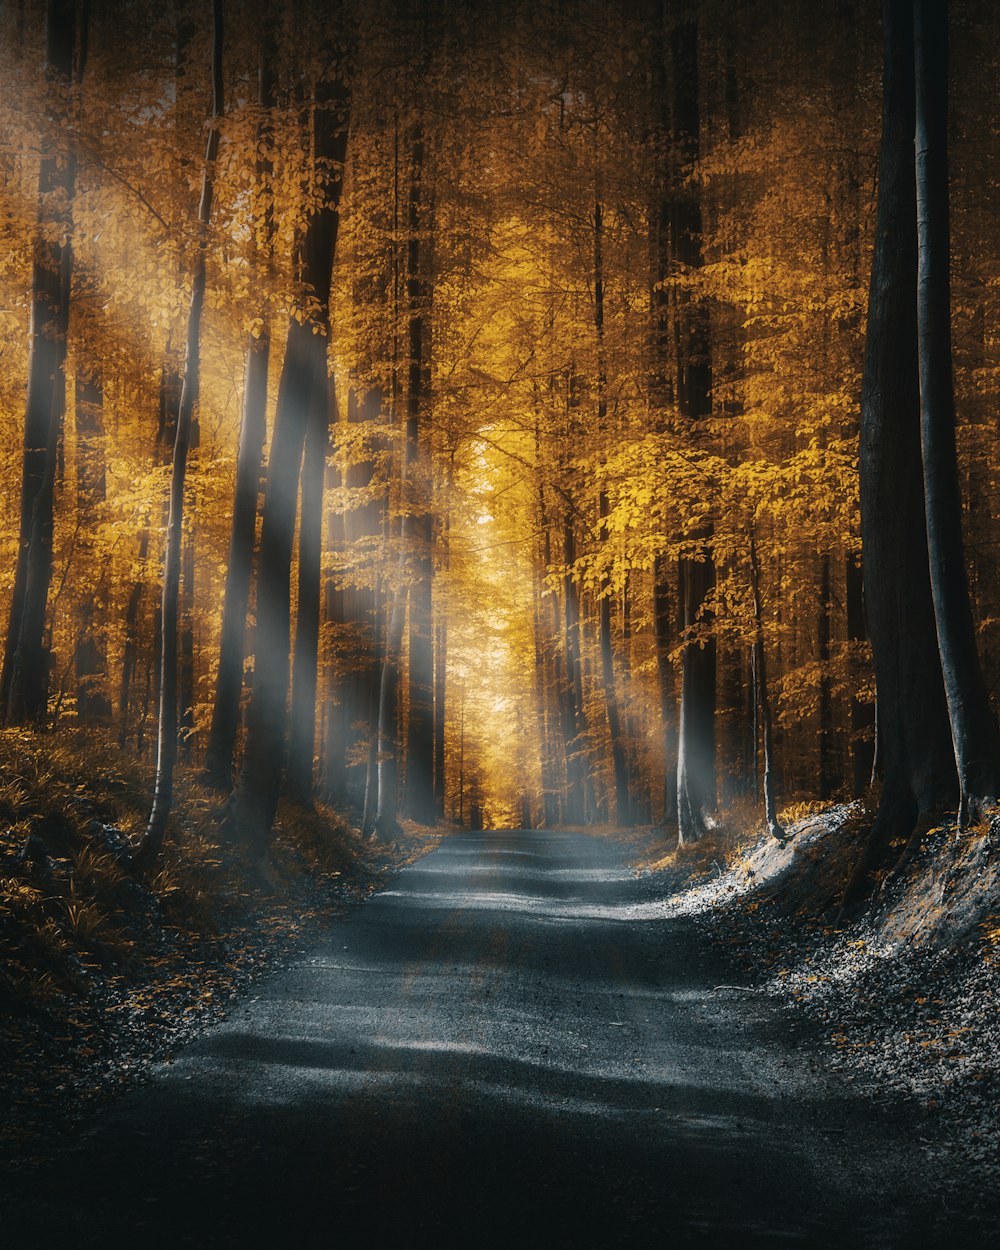 a road in the middle of a forest with a bright light coming through the trees